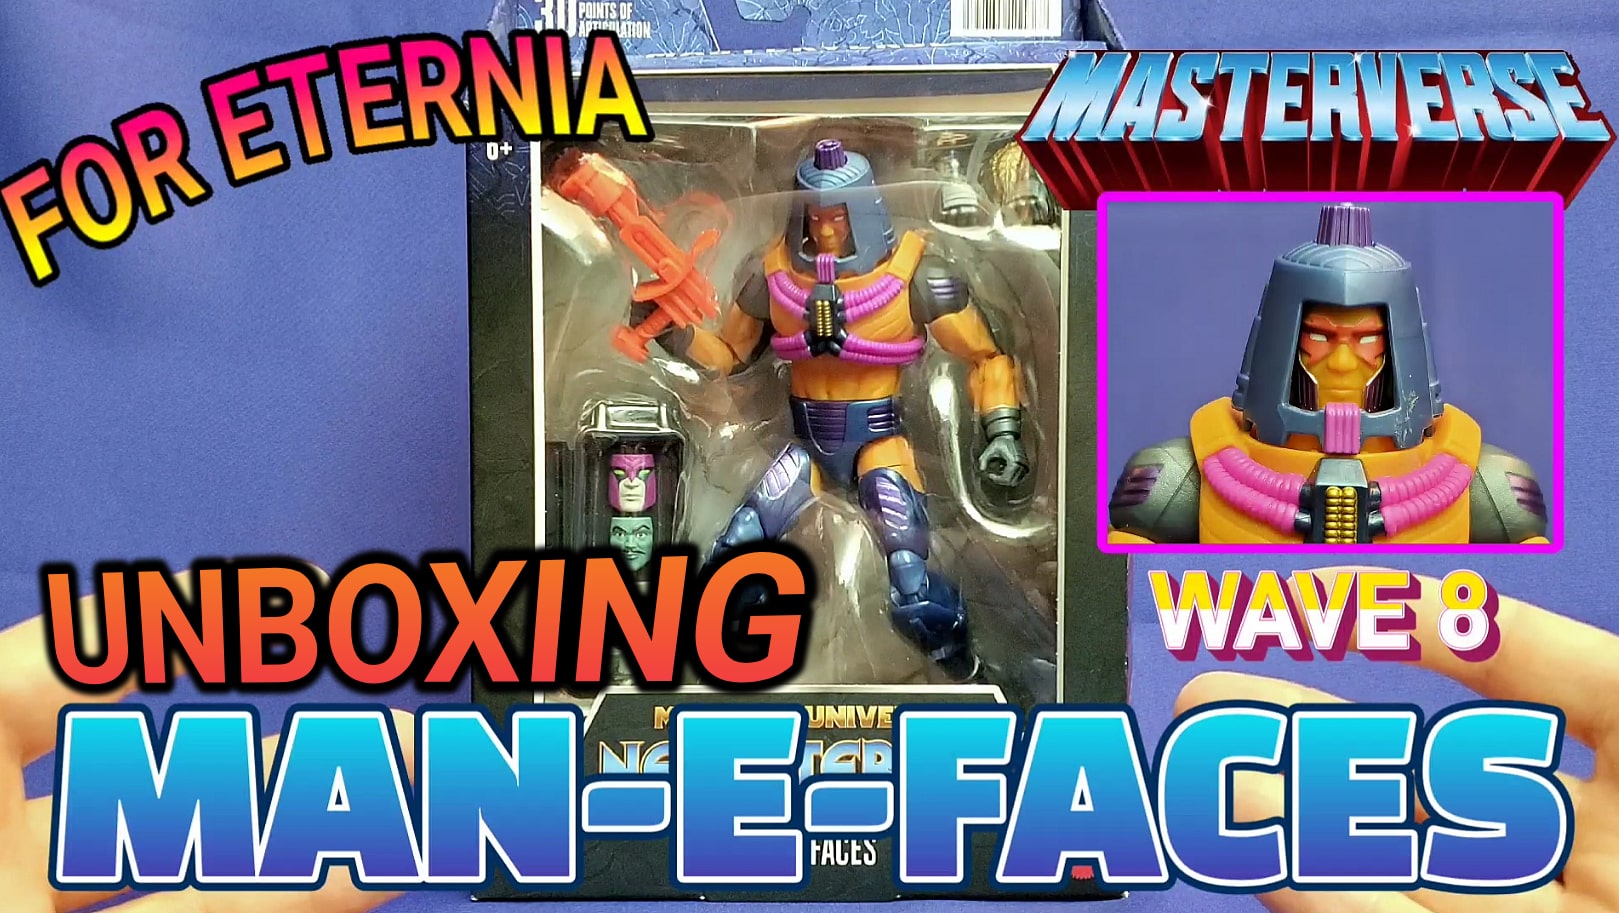 Watch our UNBOXING & REVIEW of Man-E-Faces, the Wave 8 New Eternia Masterverse figure